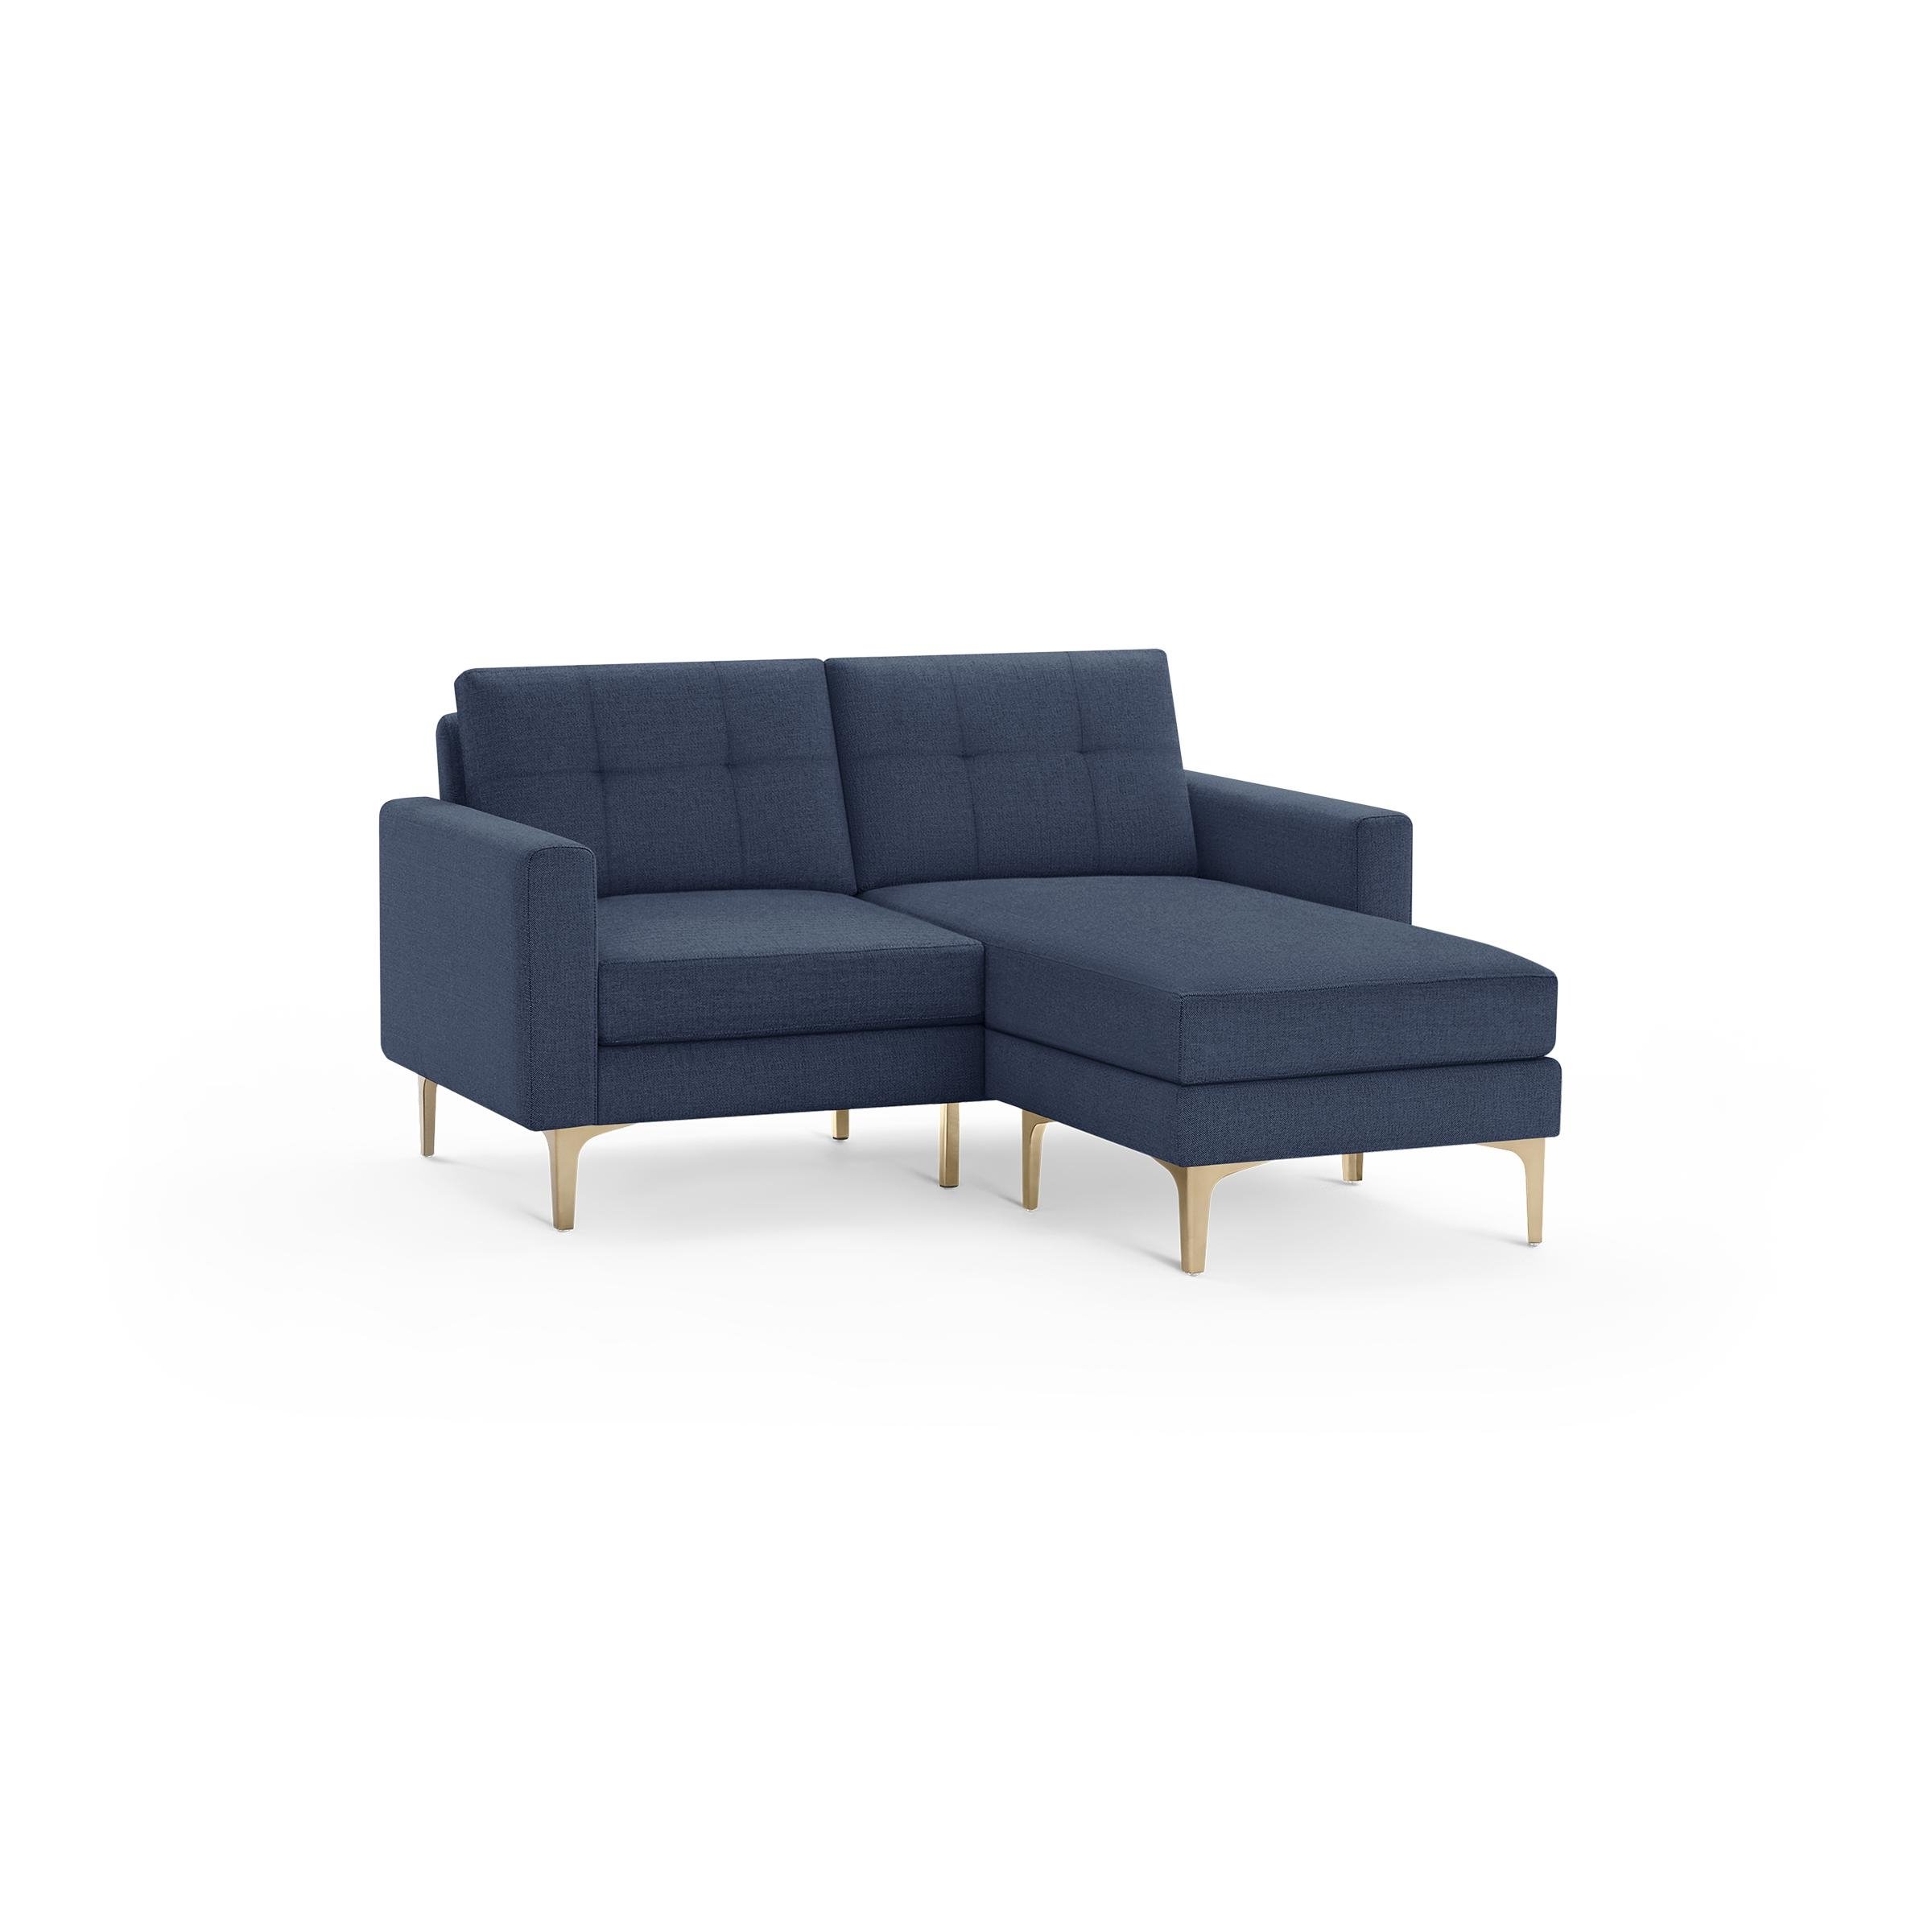 The Block Nomad Sectional Loveseat in Navy Blue - Image 1